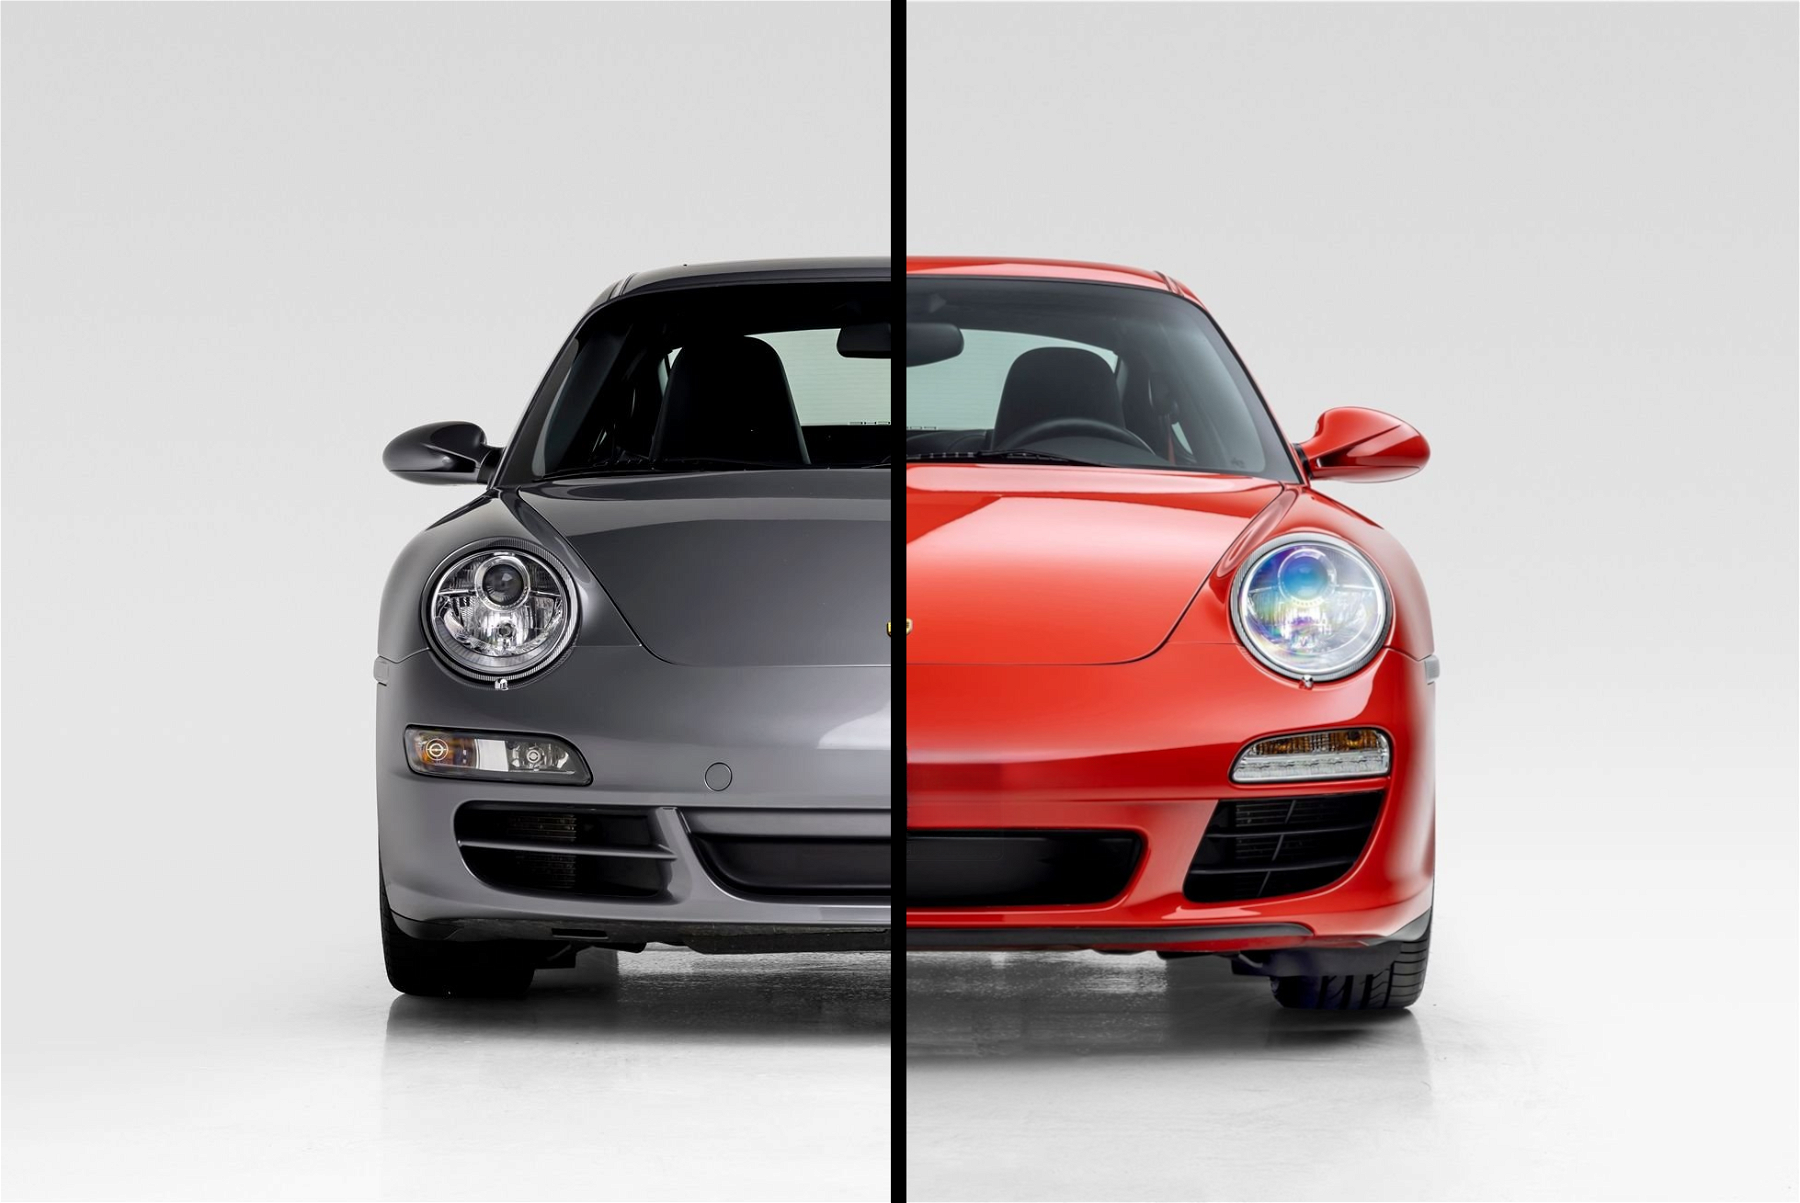 Porsche 997.1 or 997.2 Carrera (S) – Which is the better entry-level 911?